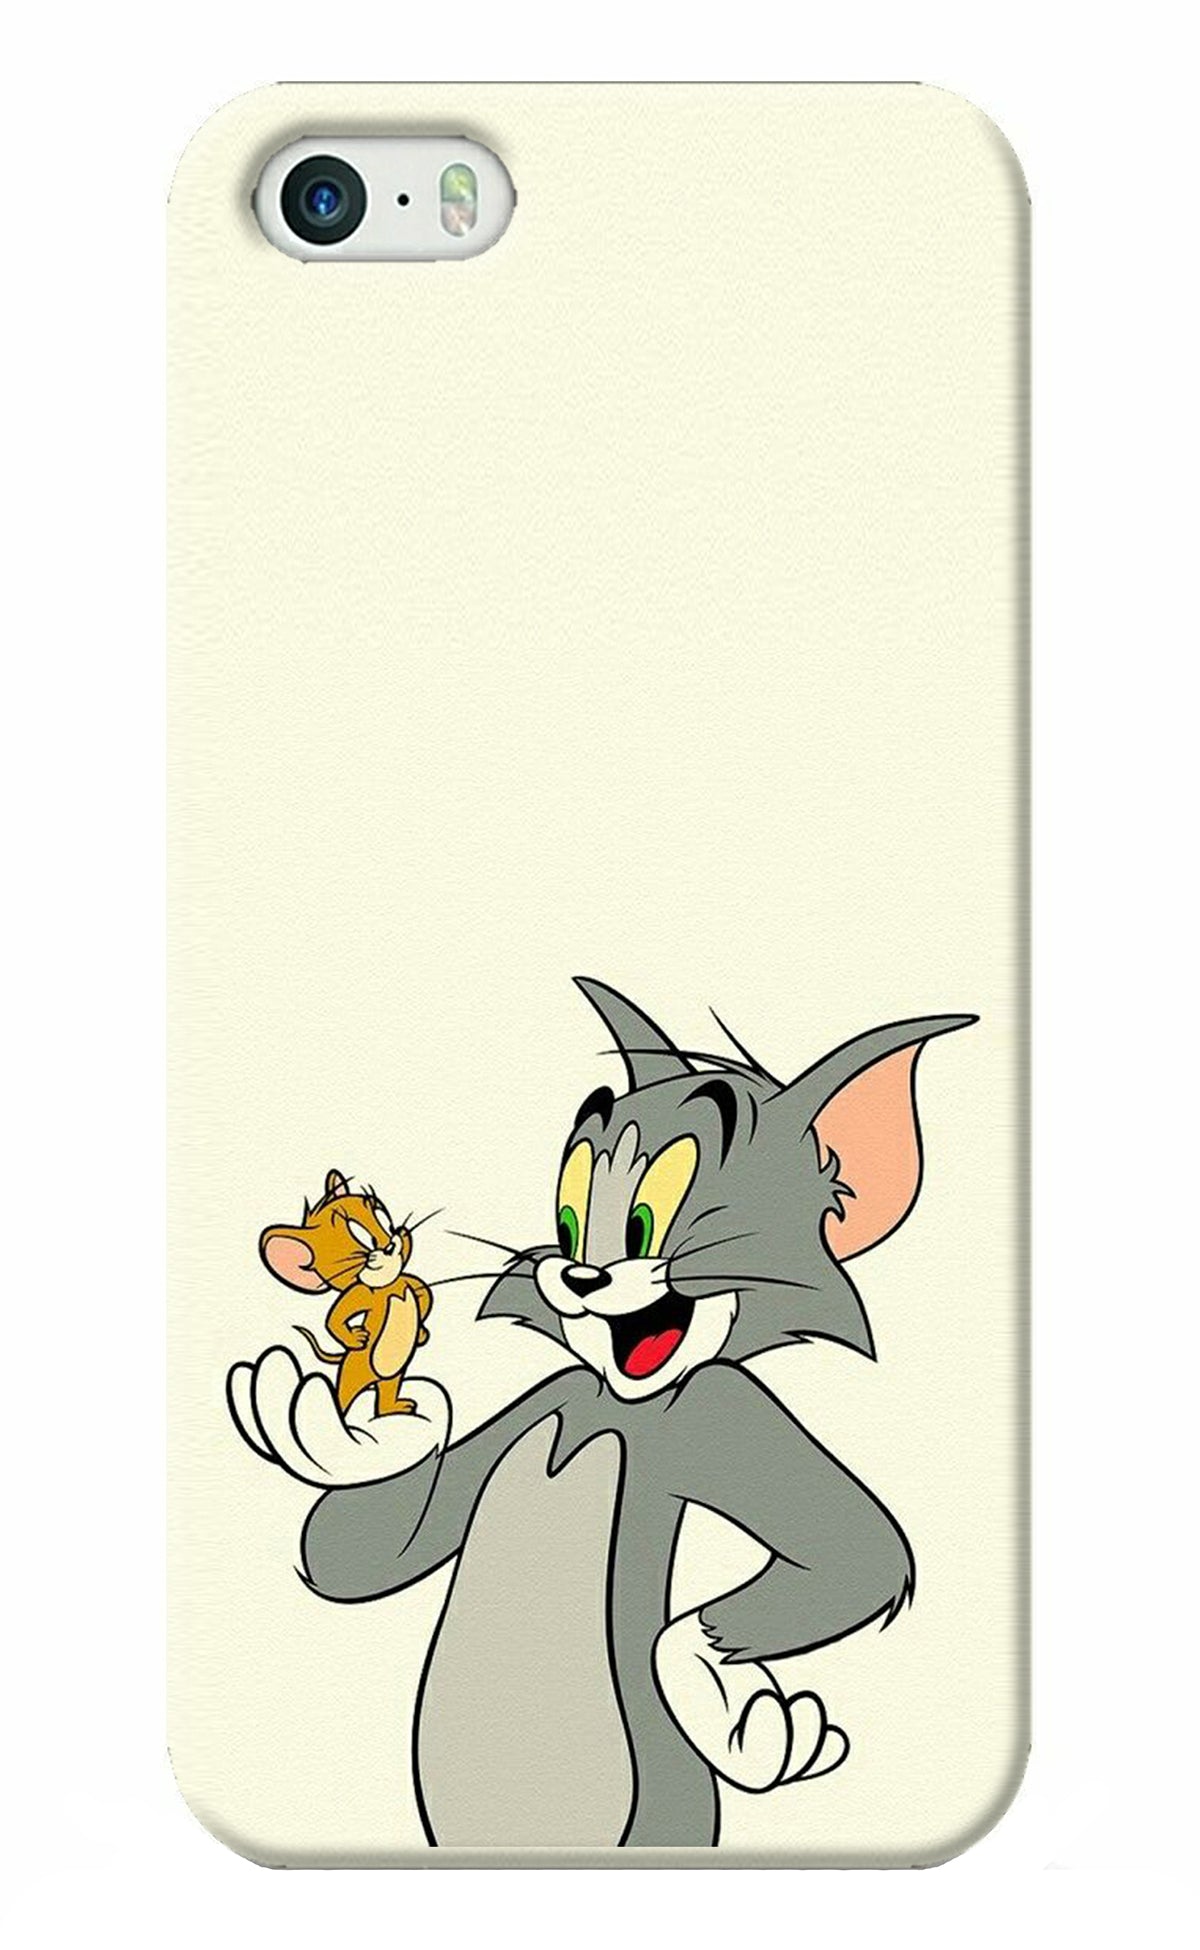 Tom & Jerry iPhone 5/5s Back Cover